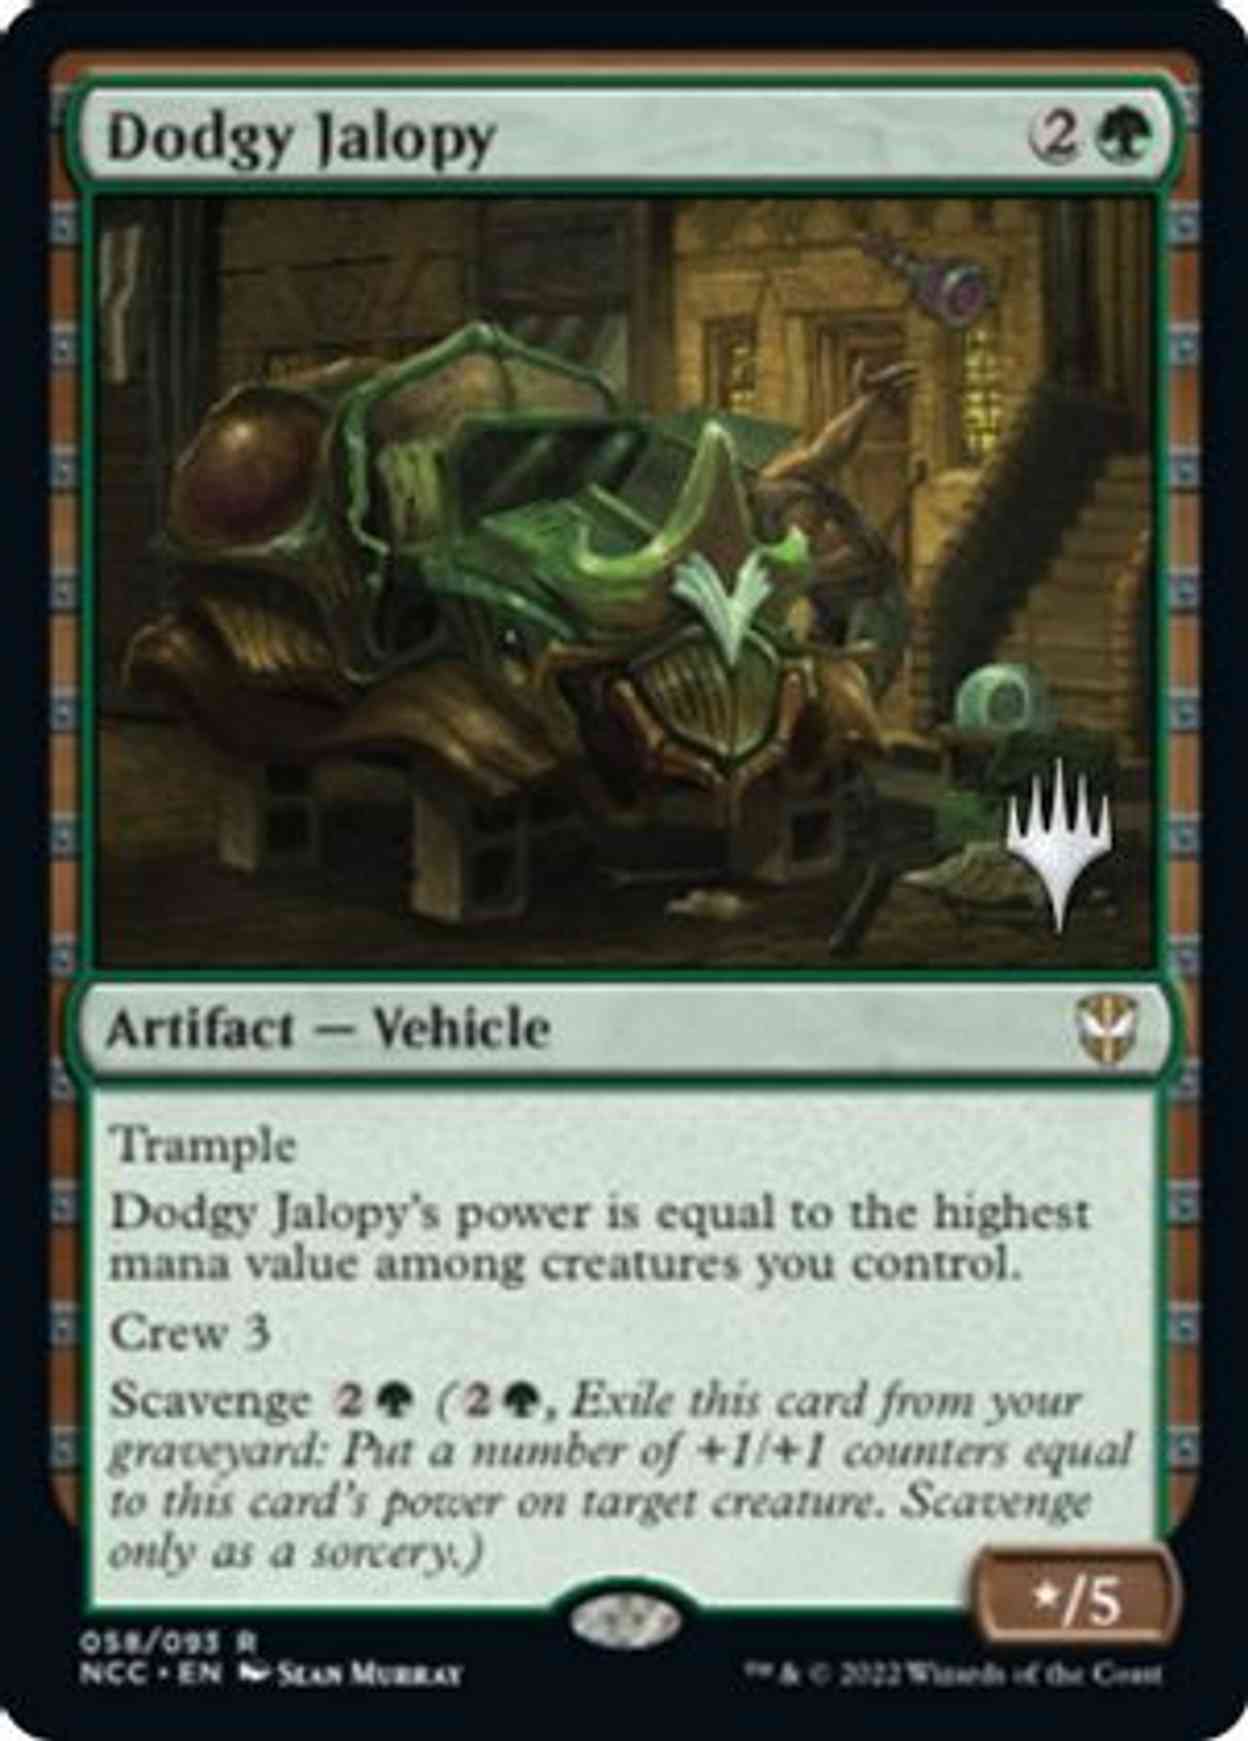 Dodgy Jalopy magic card front